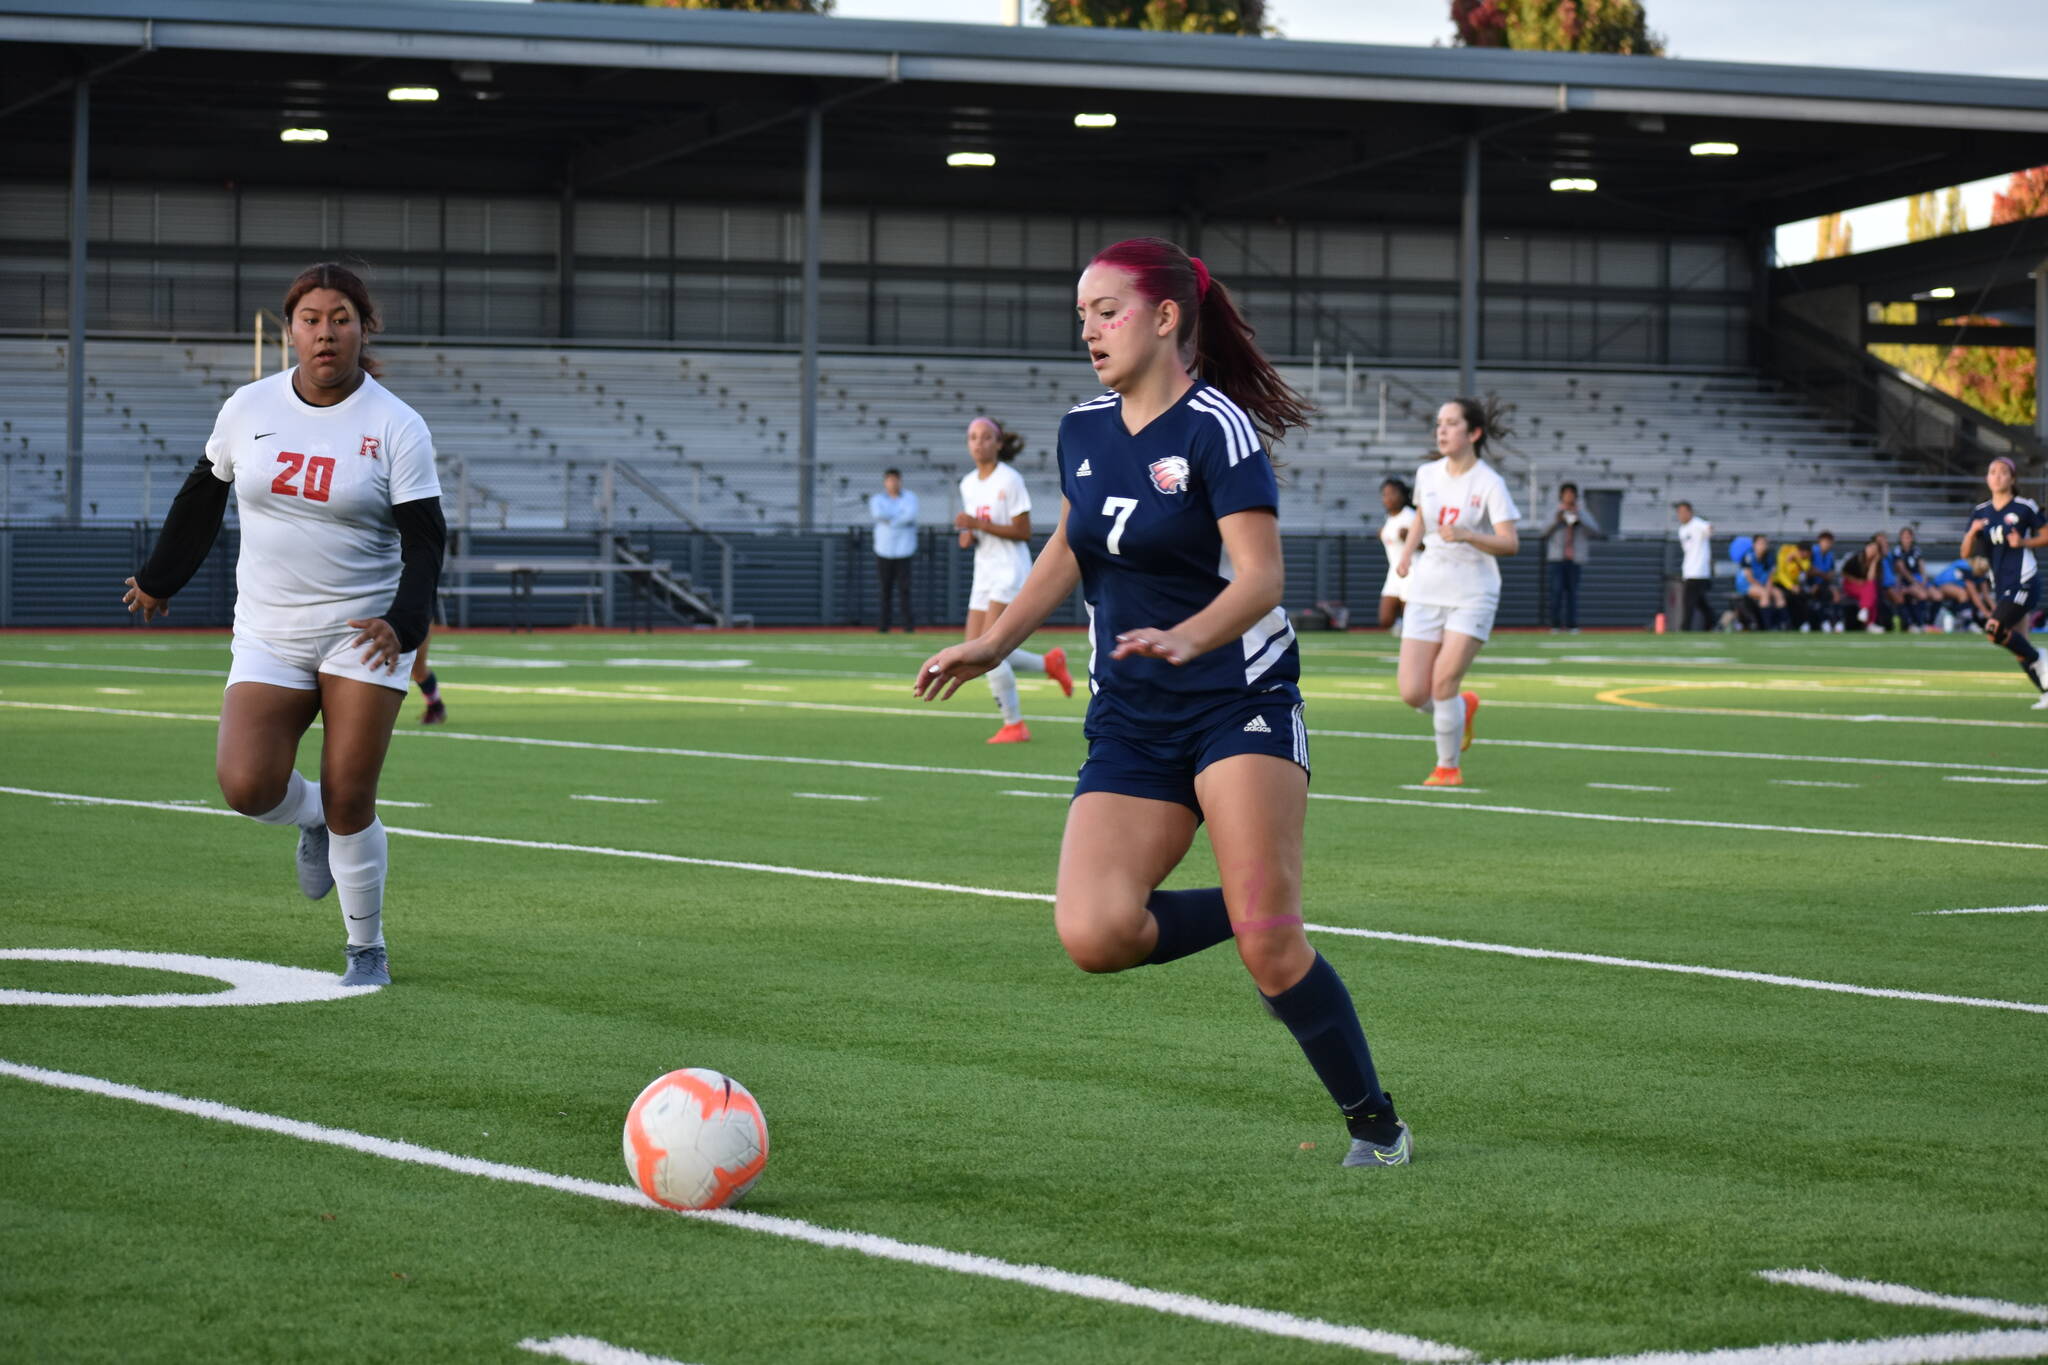 Ralston seen dribbling her way to a goal against Renton. Ben Ray / The Reporter